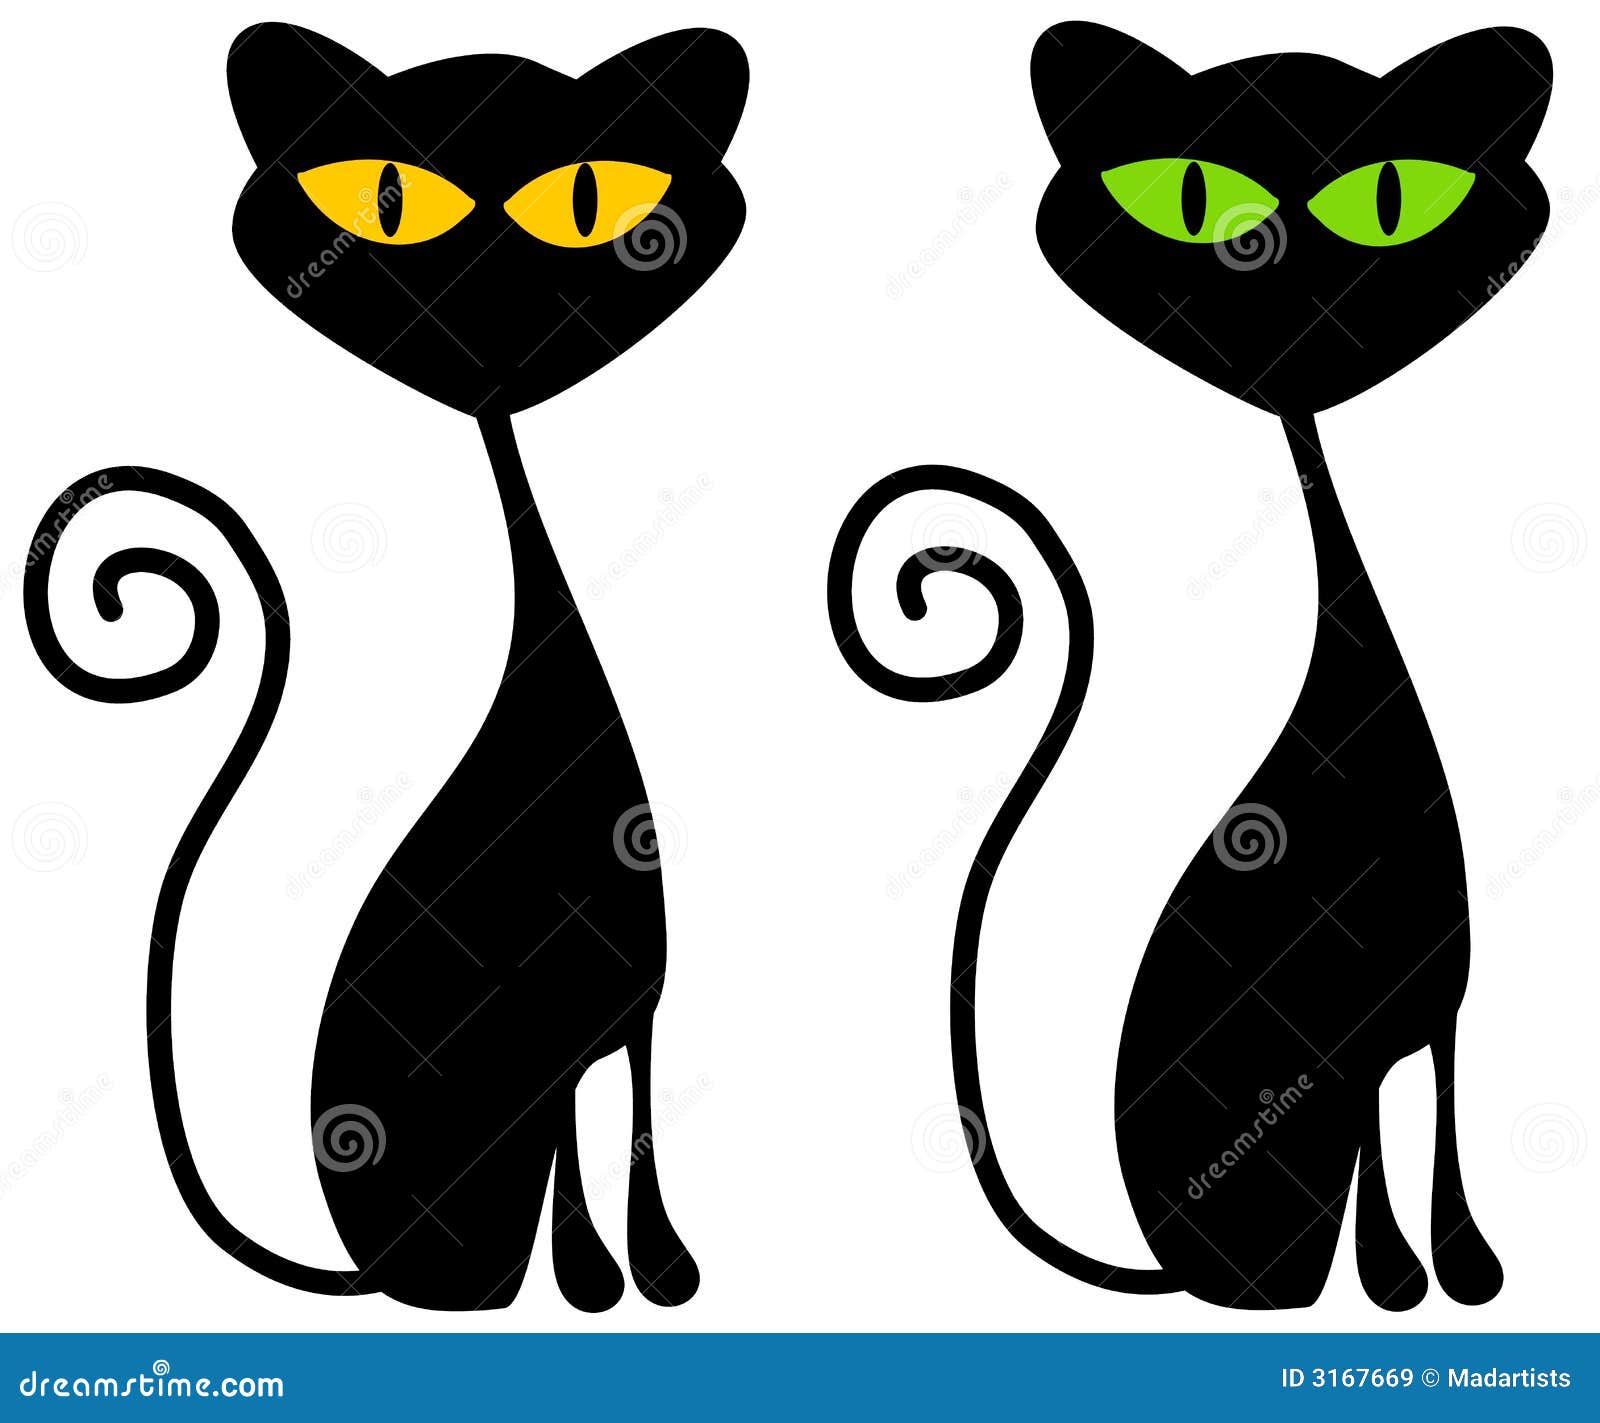 scary cat clipart free - photo #15